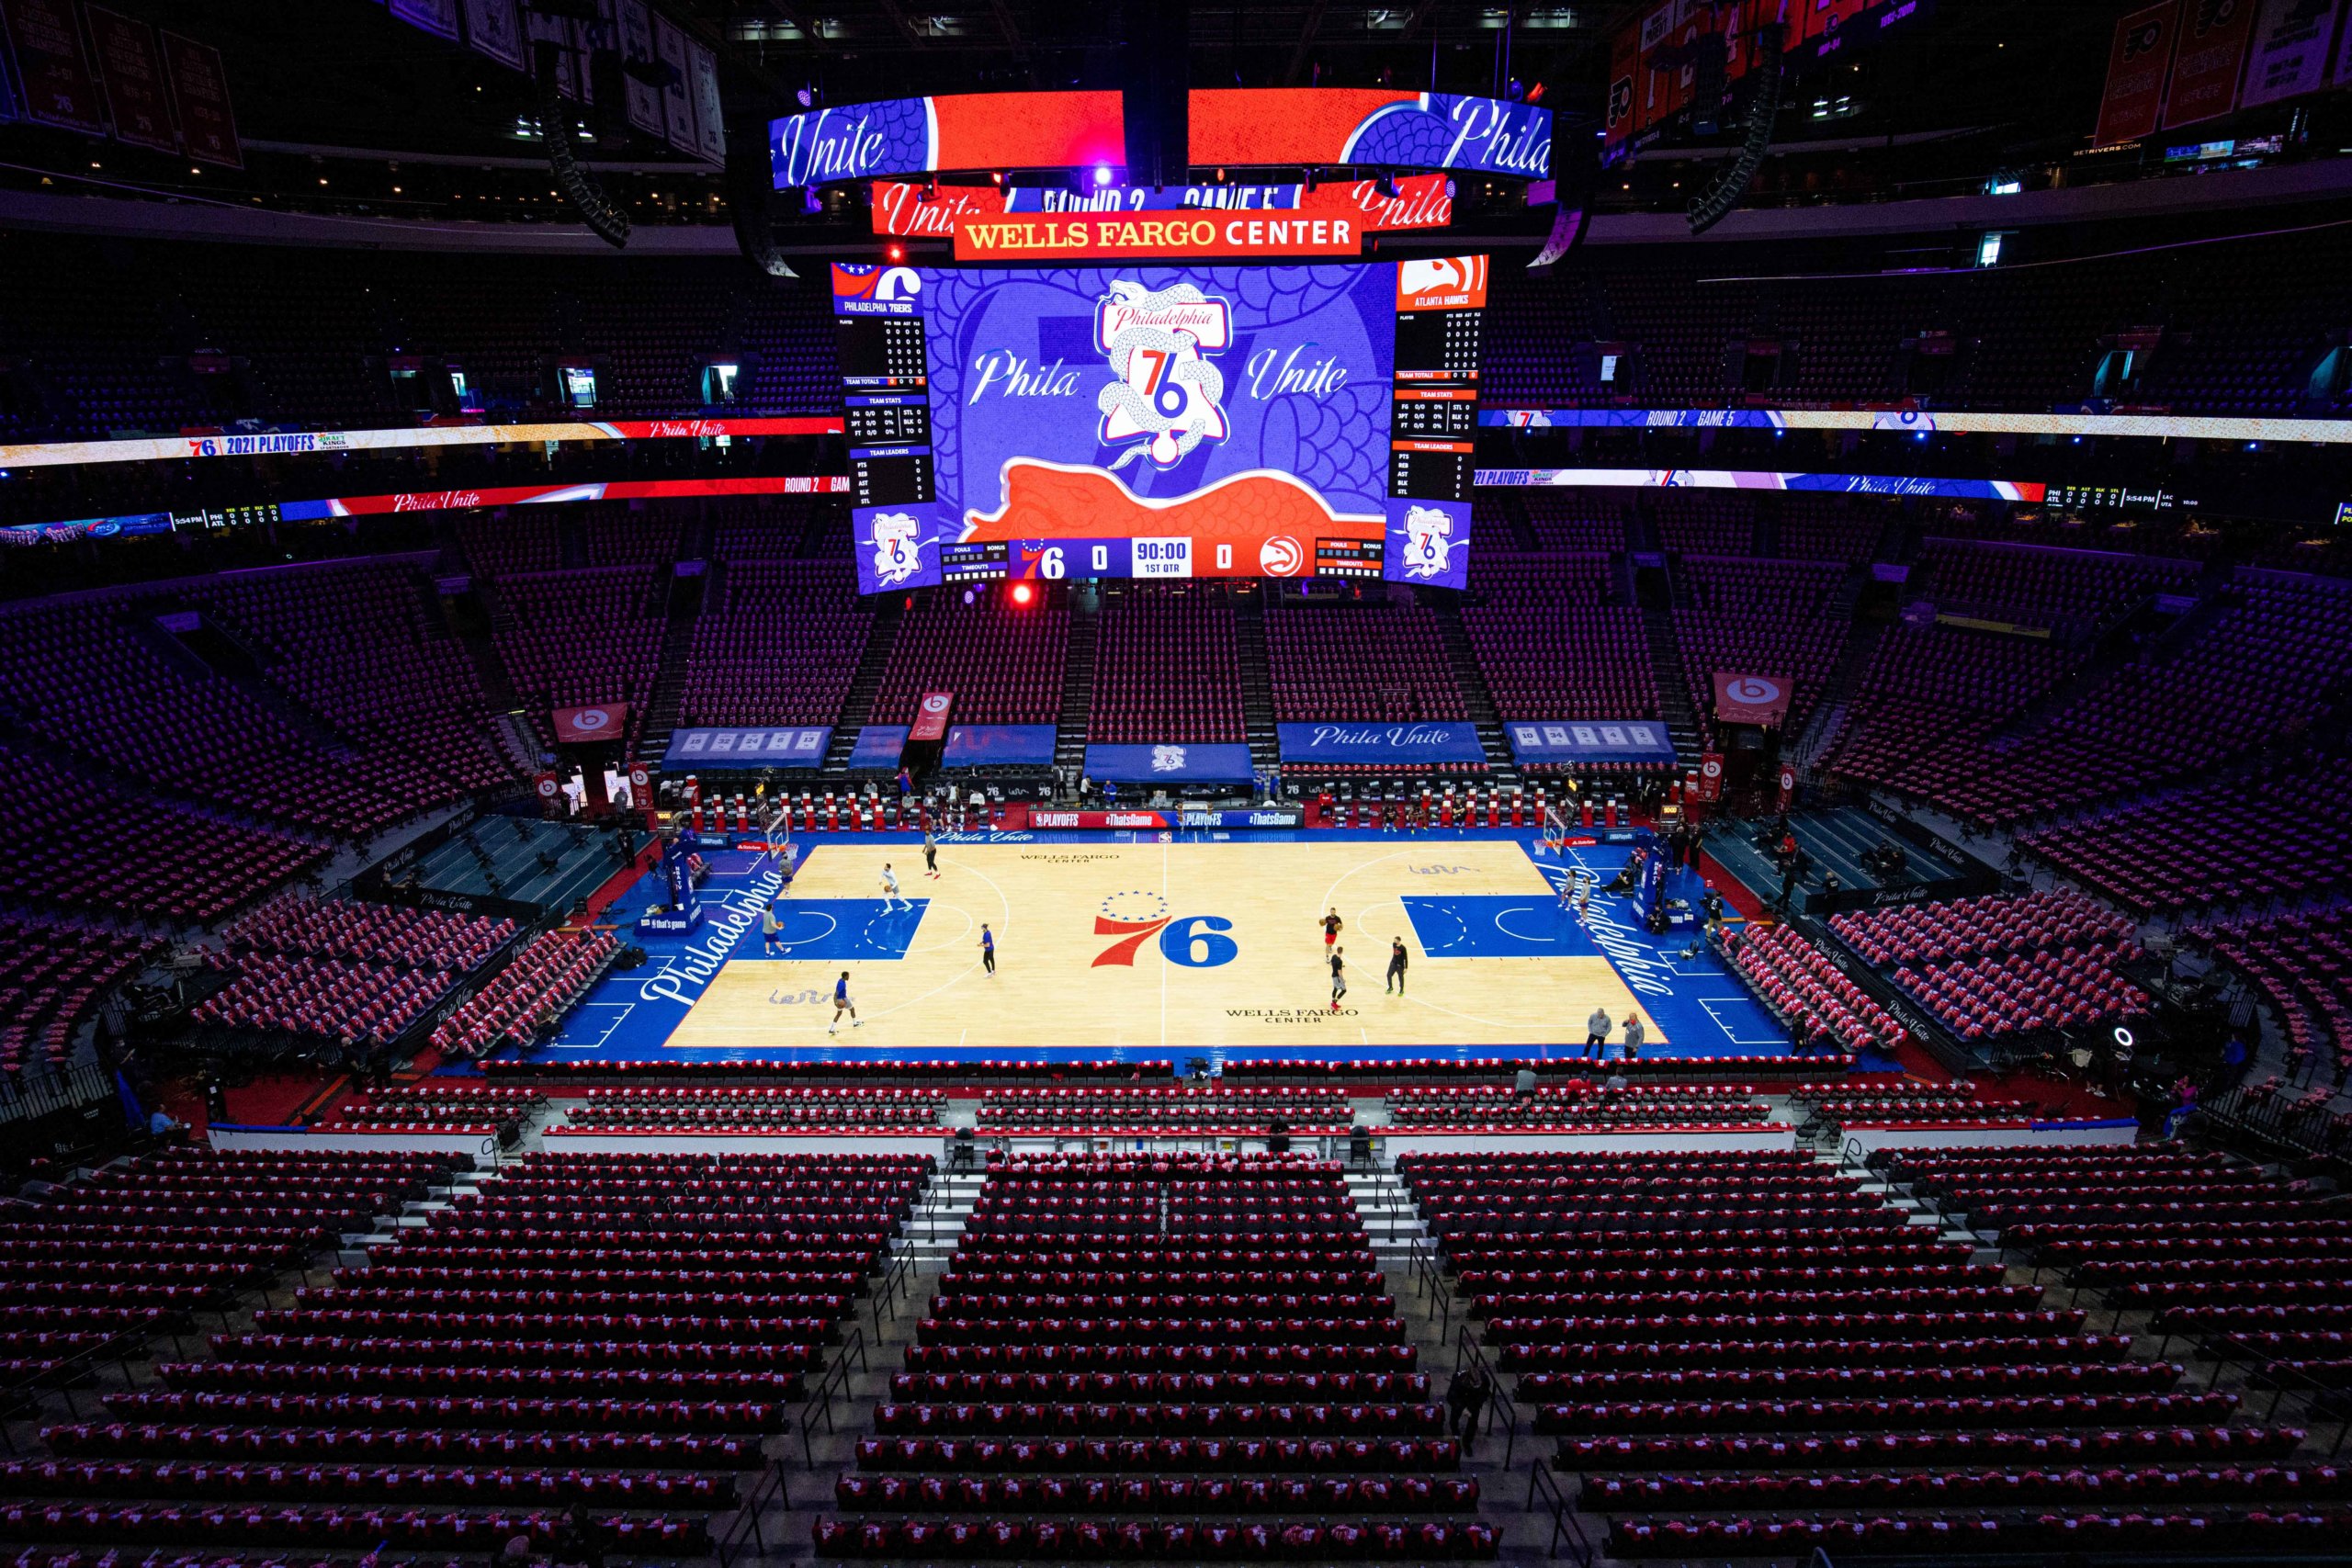 All the upgrades at the 'new' Wells Fargo Center, aimed at today's fan